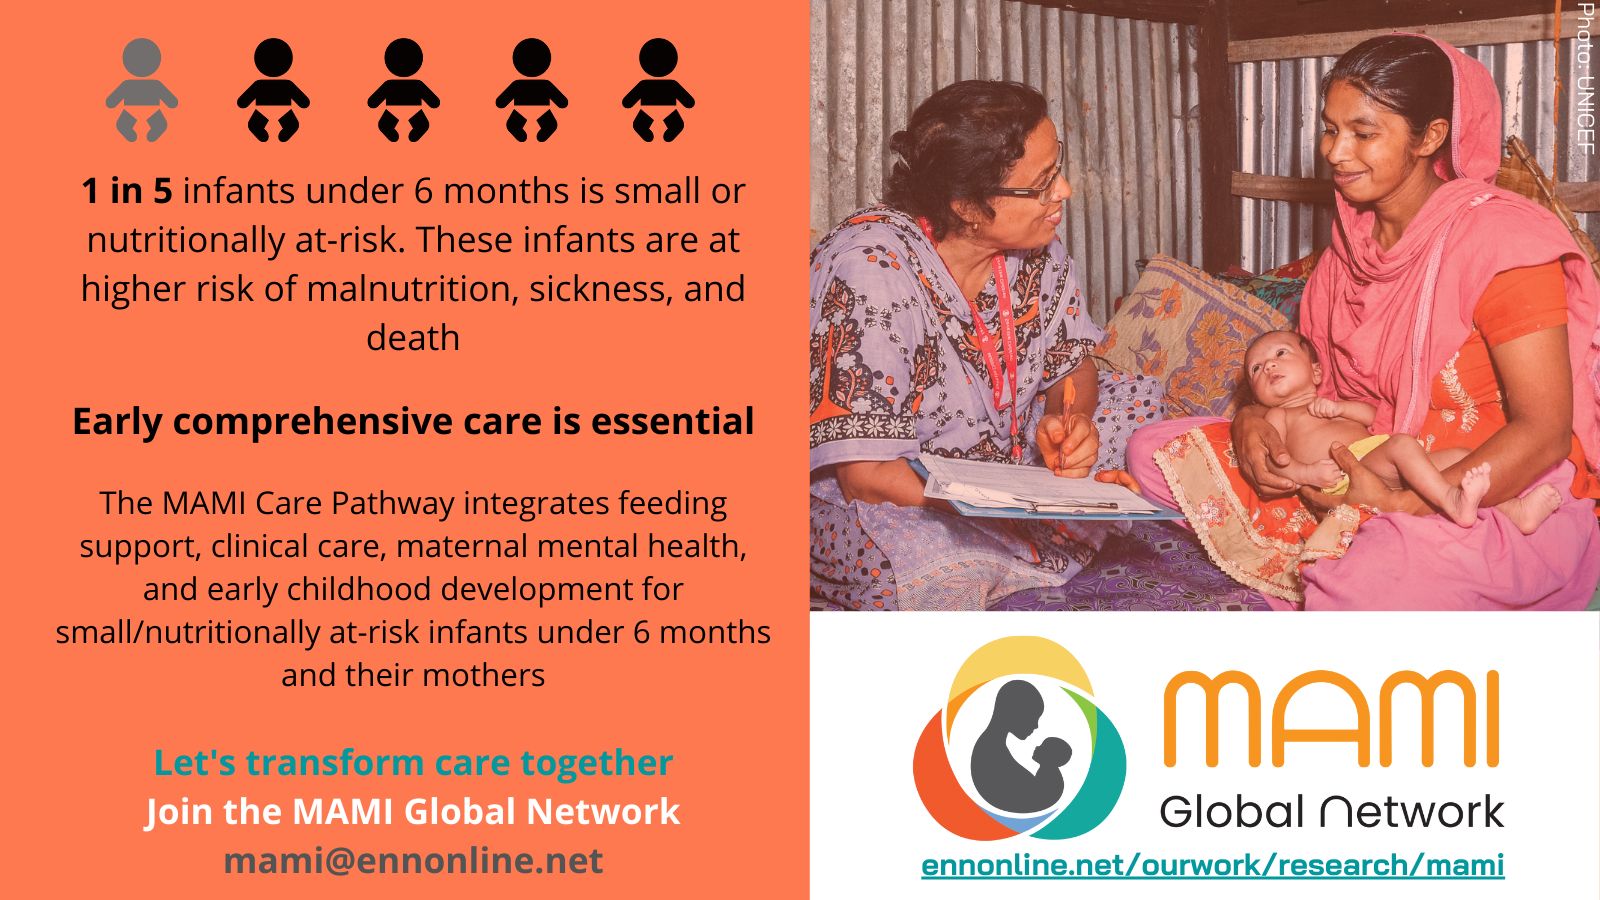 Social media card showing that 1 in 5 infants under 6 months are small or nutritionally at-risk. These infants are at higher risk of malnutrition, sickness, and death. Join the MAMI Global Network